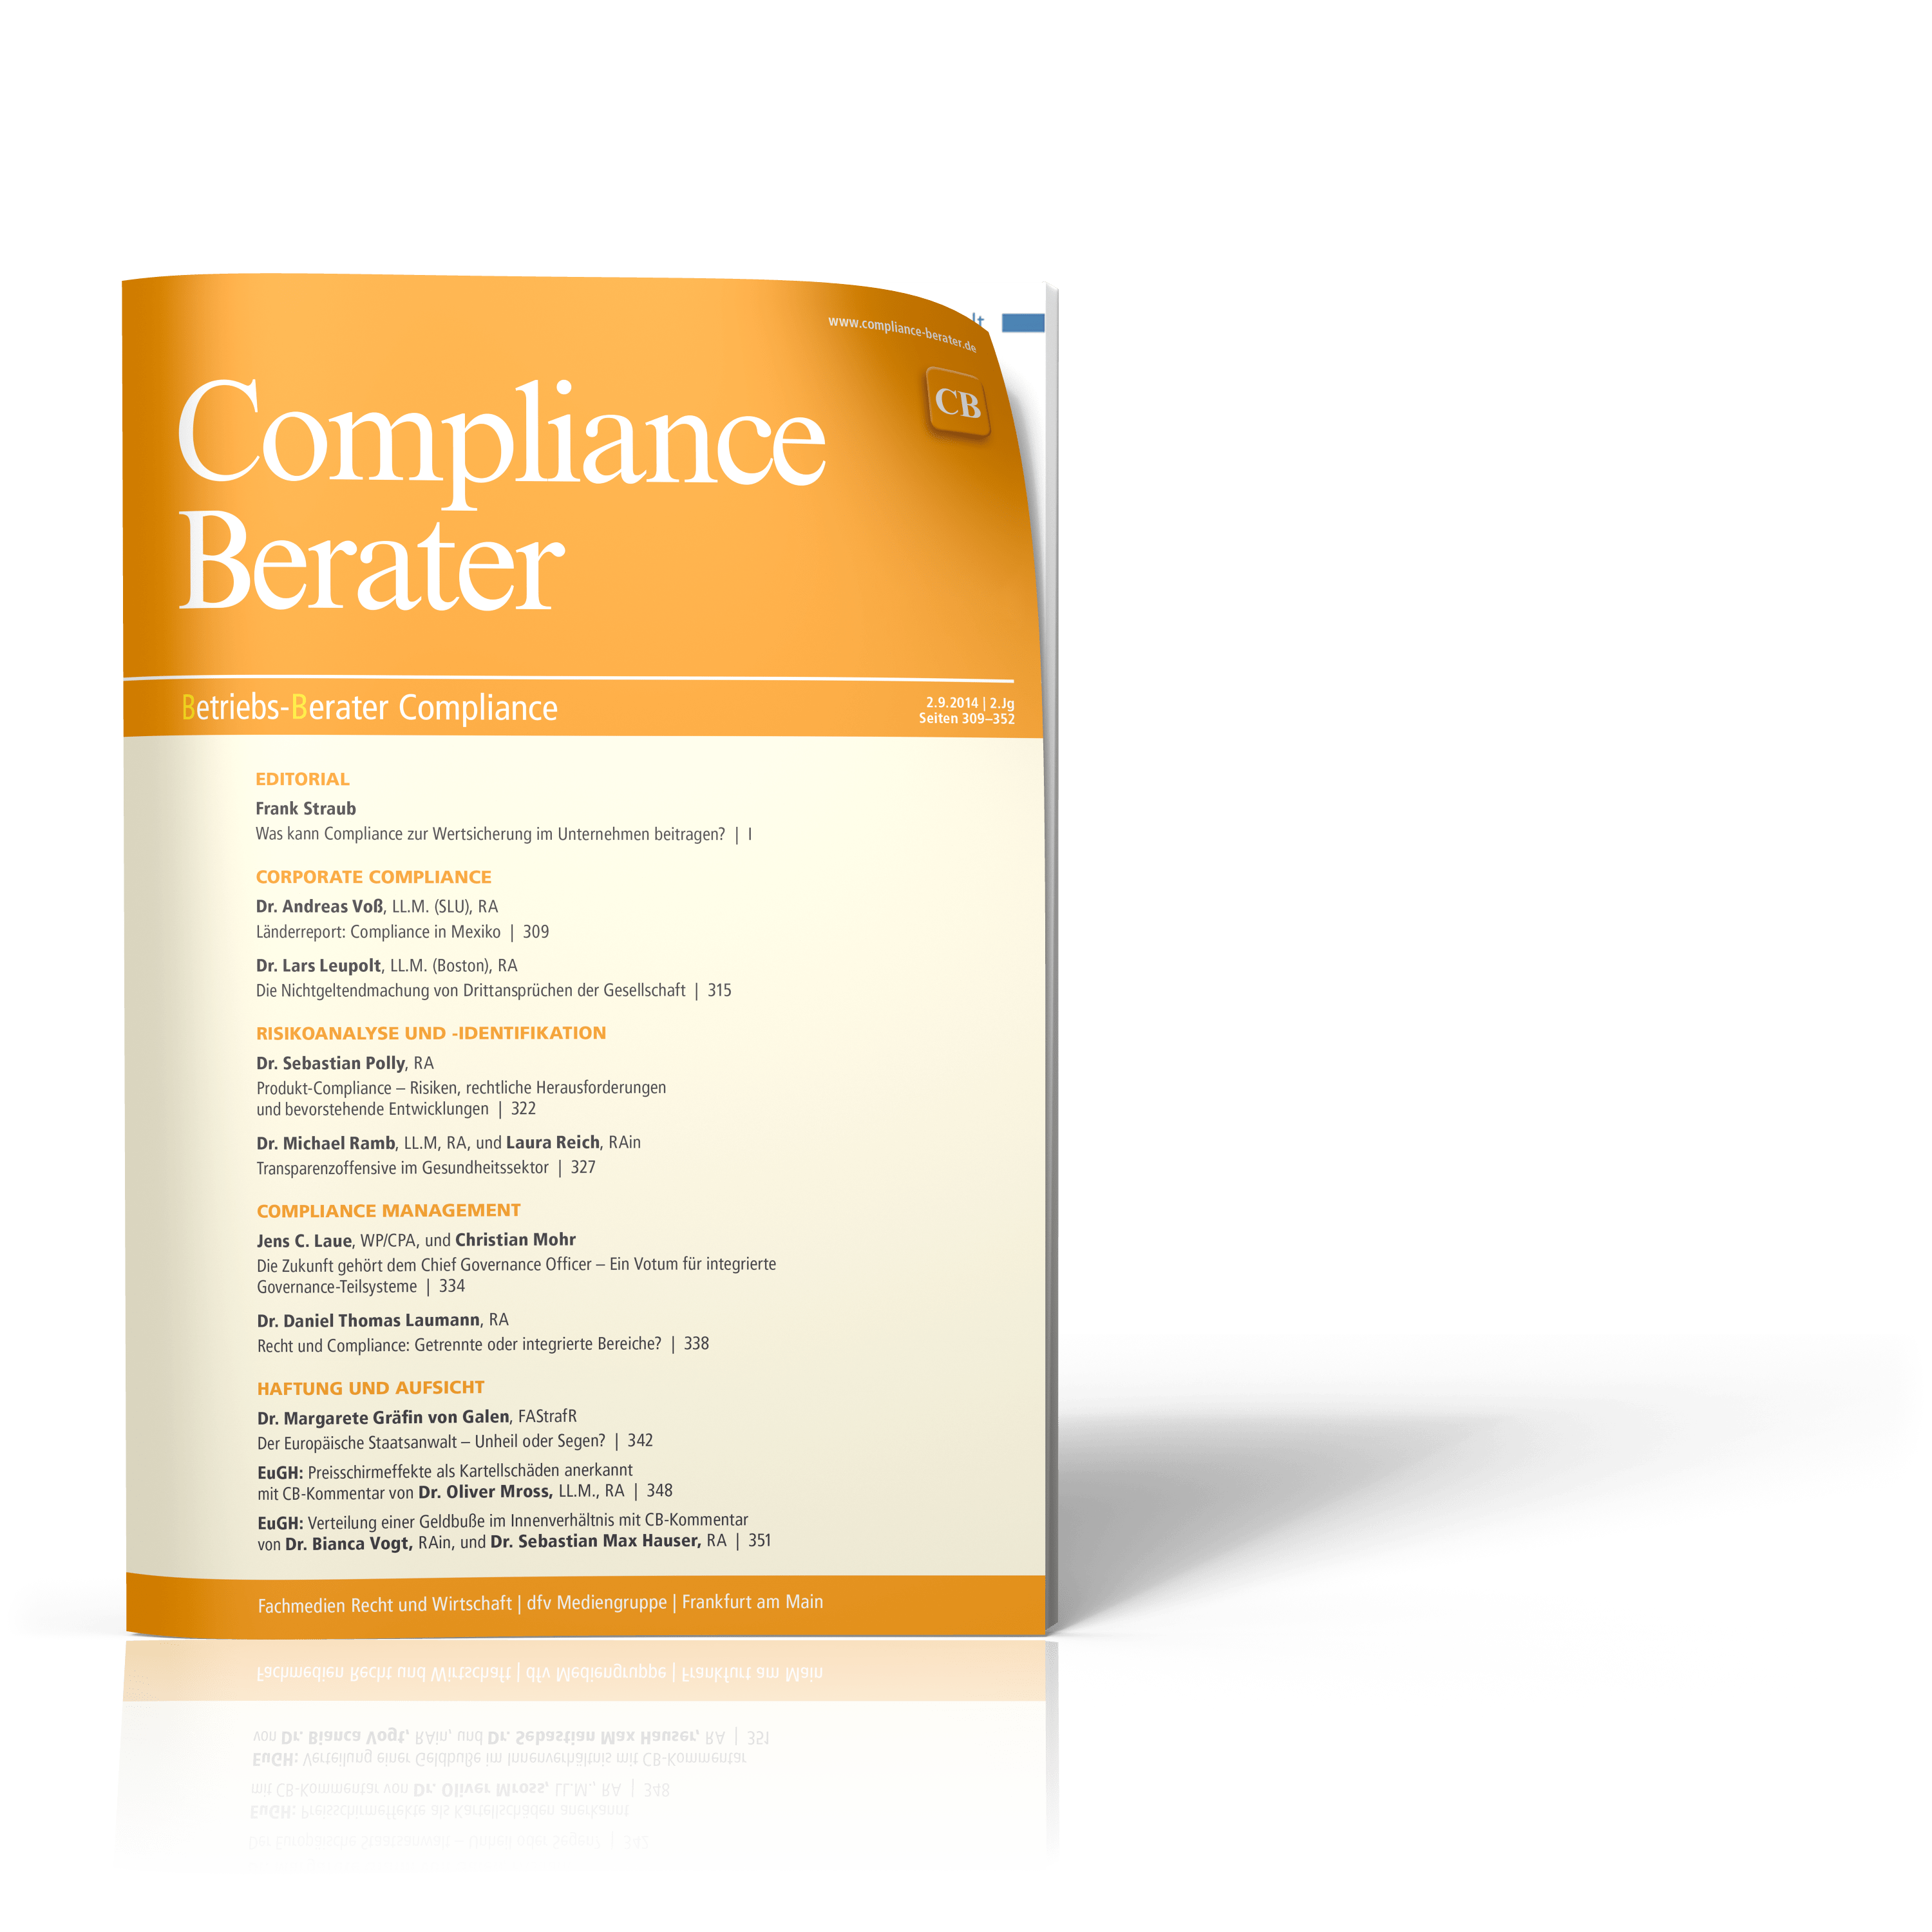 Cover des Compliance Beraters